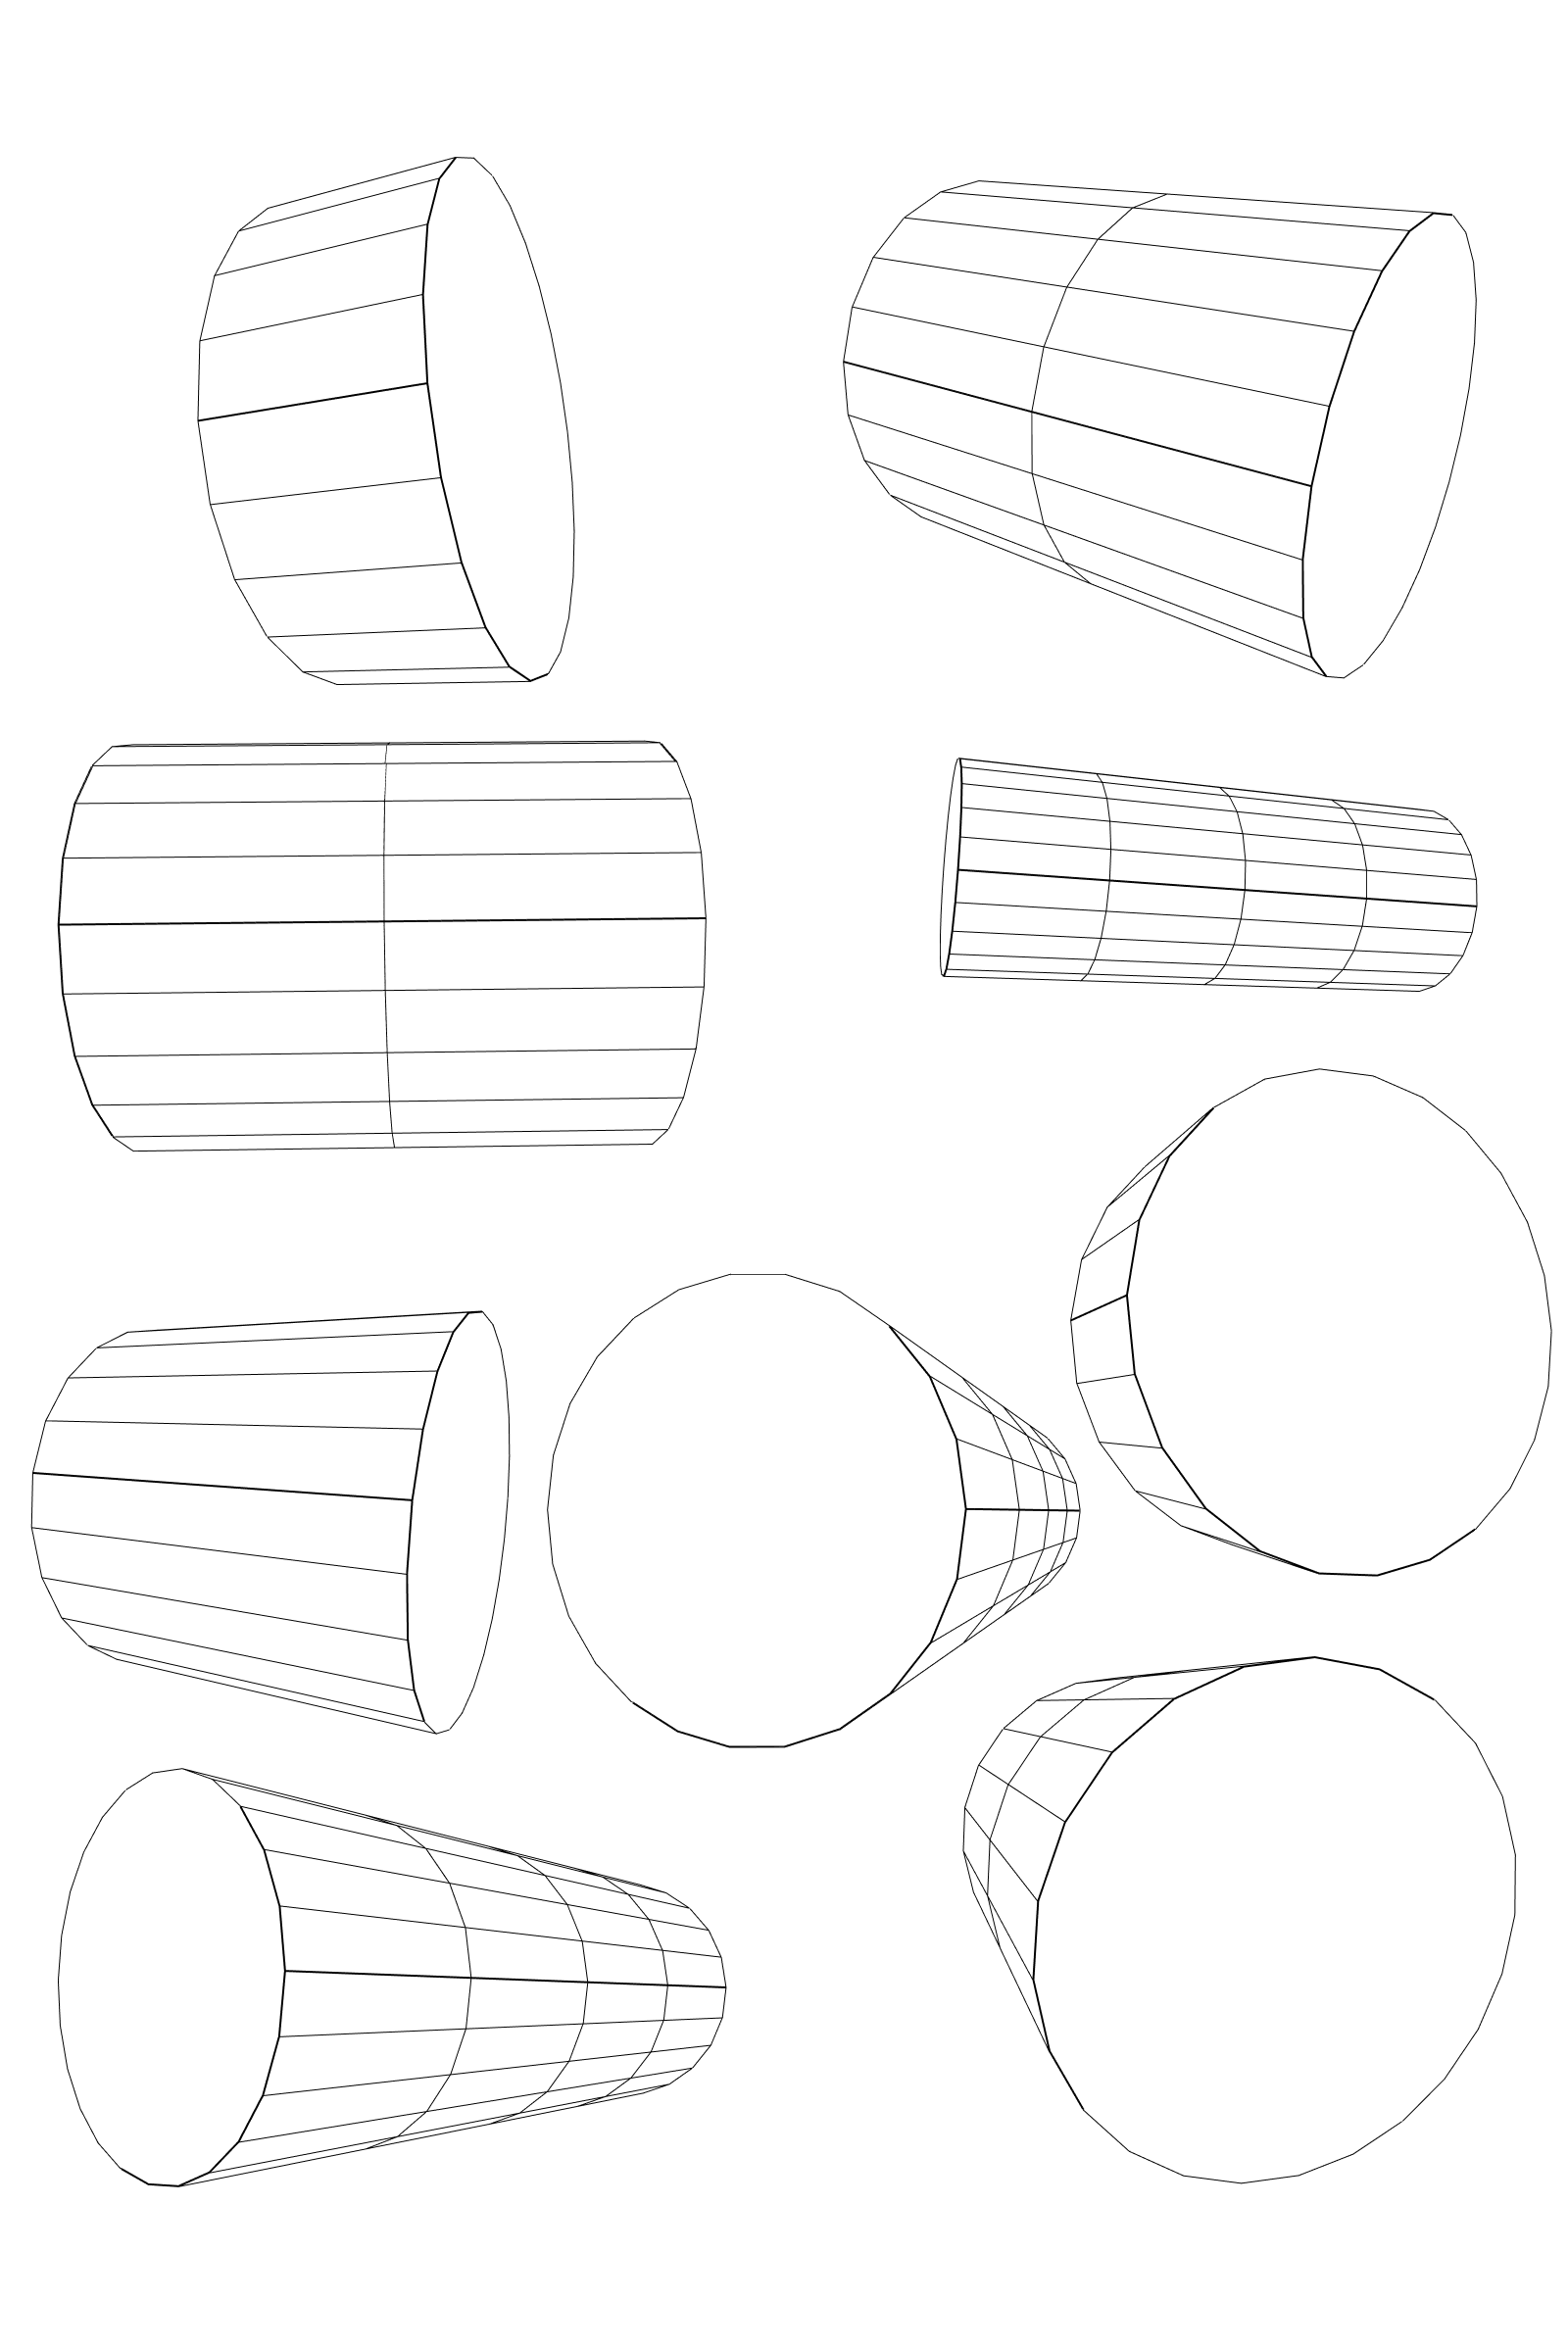 draw boxes spheres cones cylinders as a warm-up